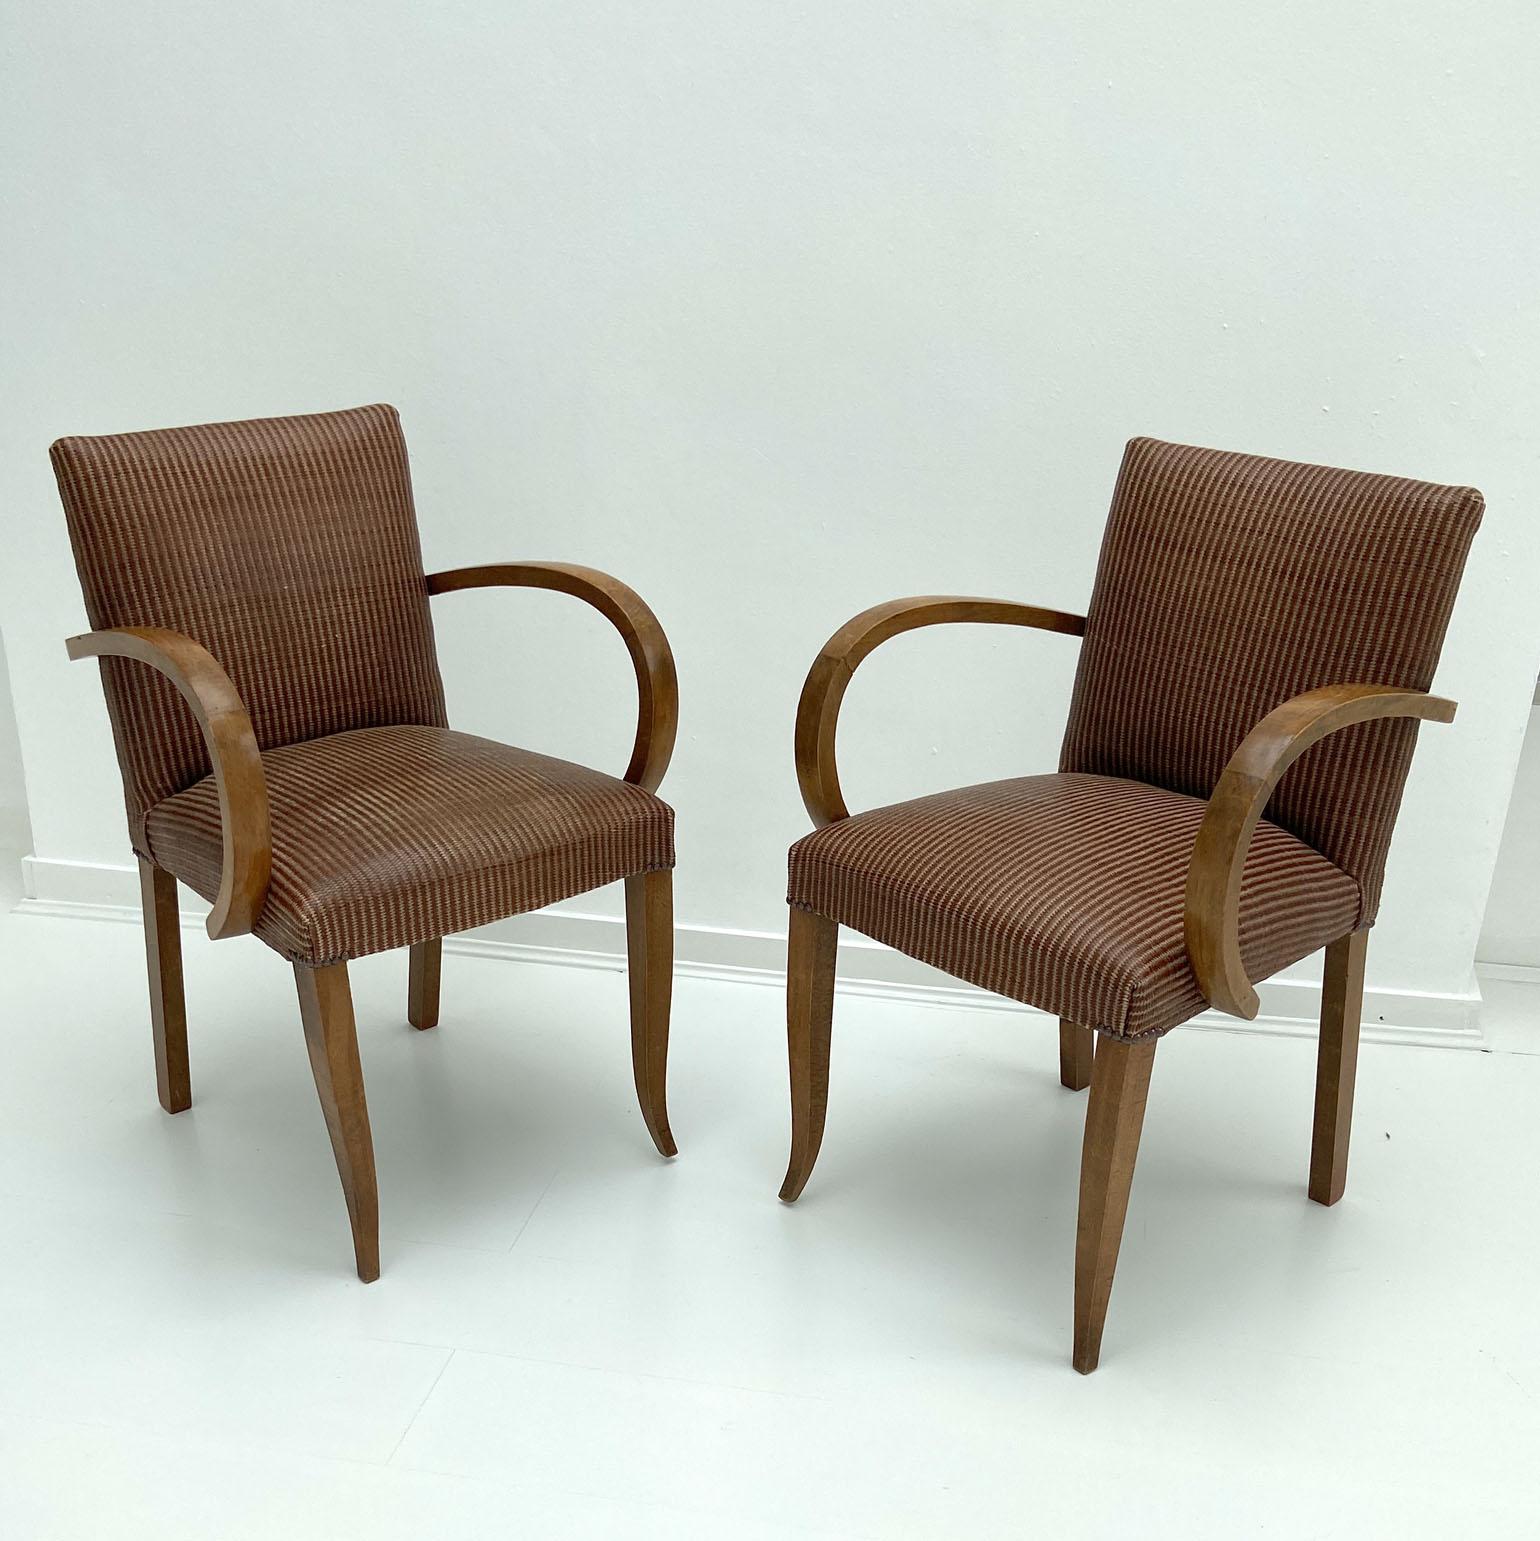 Art Deco Pair of Modernist Bridge Chairs or Armchairs, French, 1930s